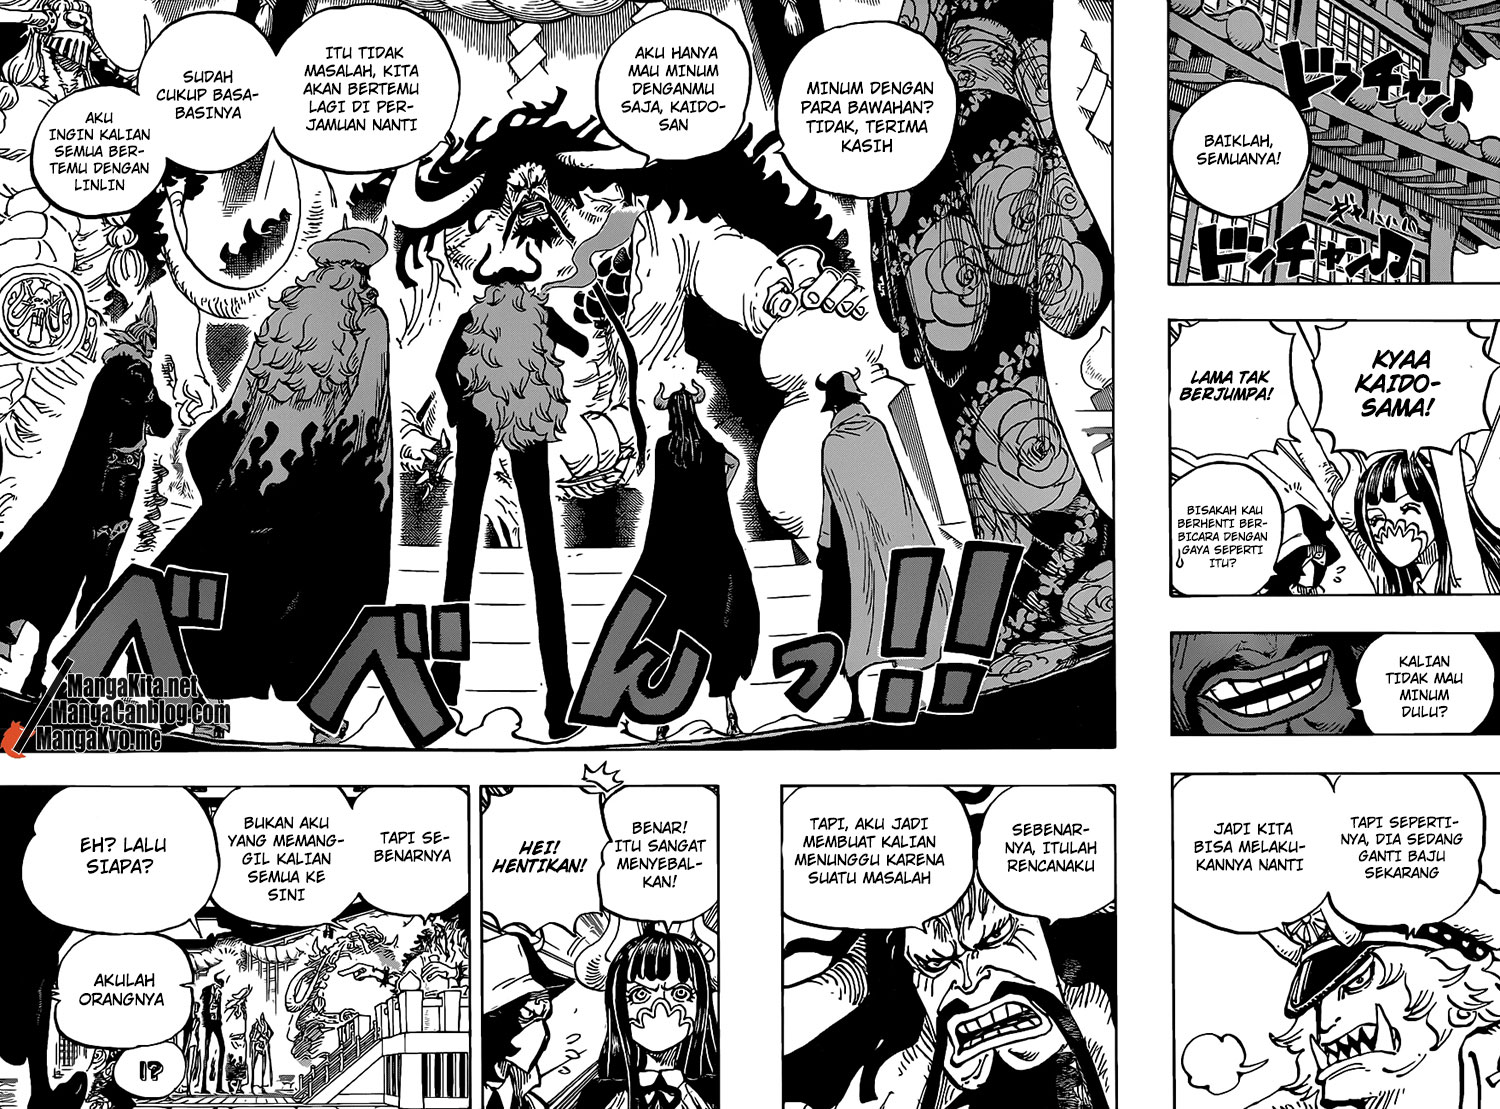 One Piece Chapter 979